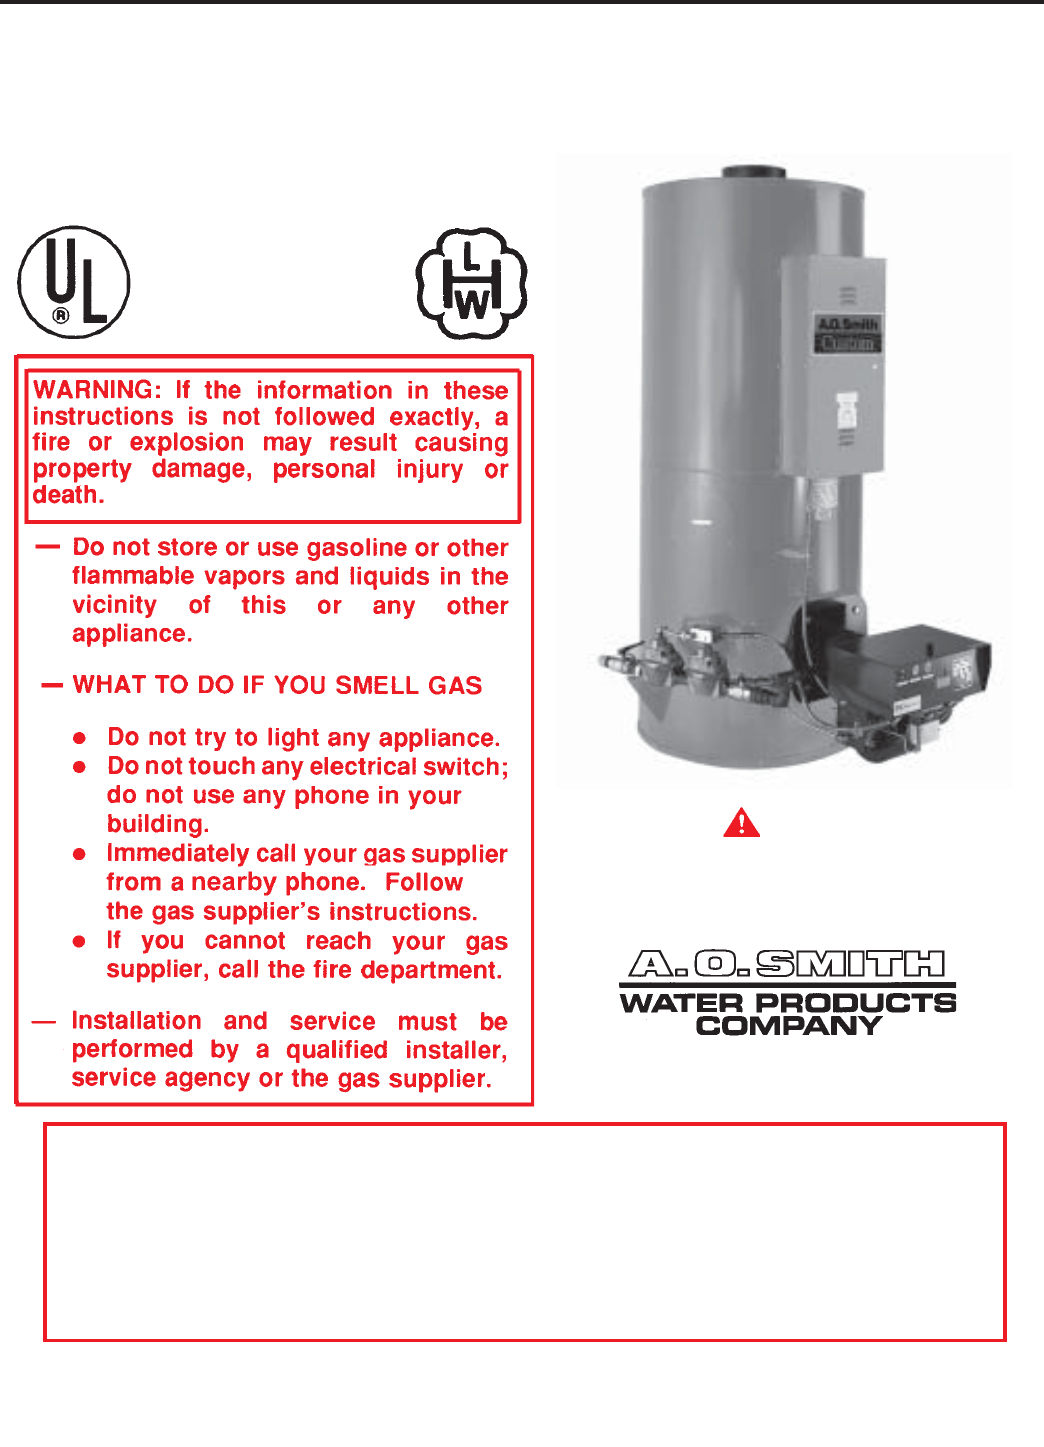 A o smith water heater air filter